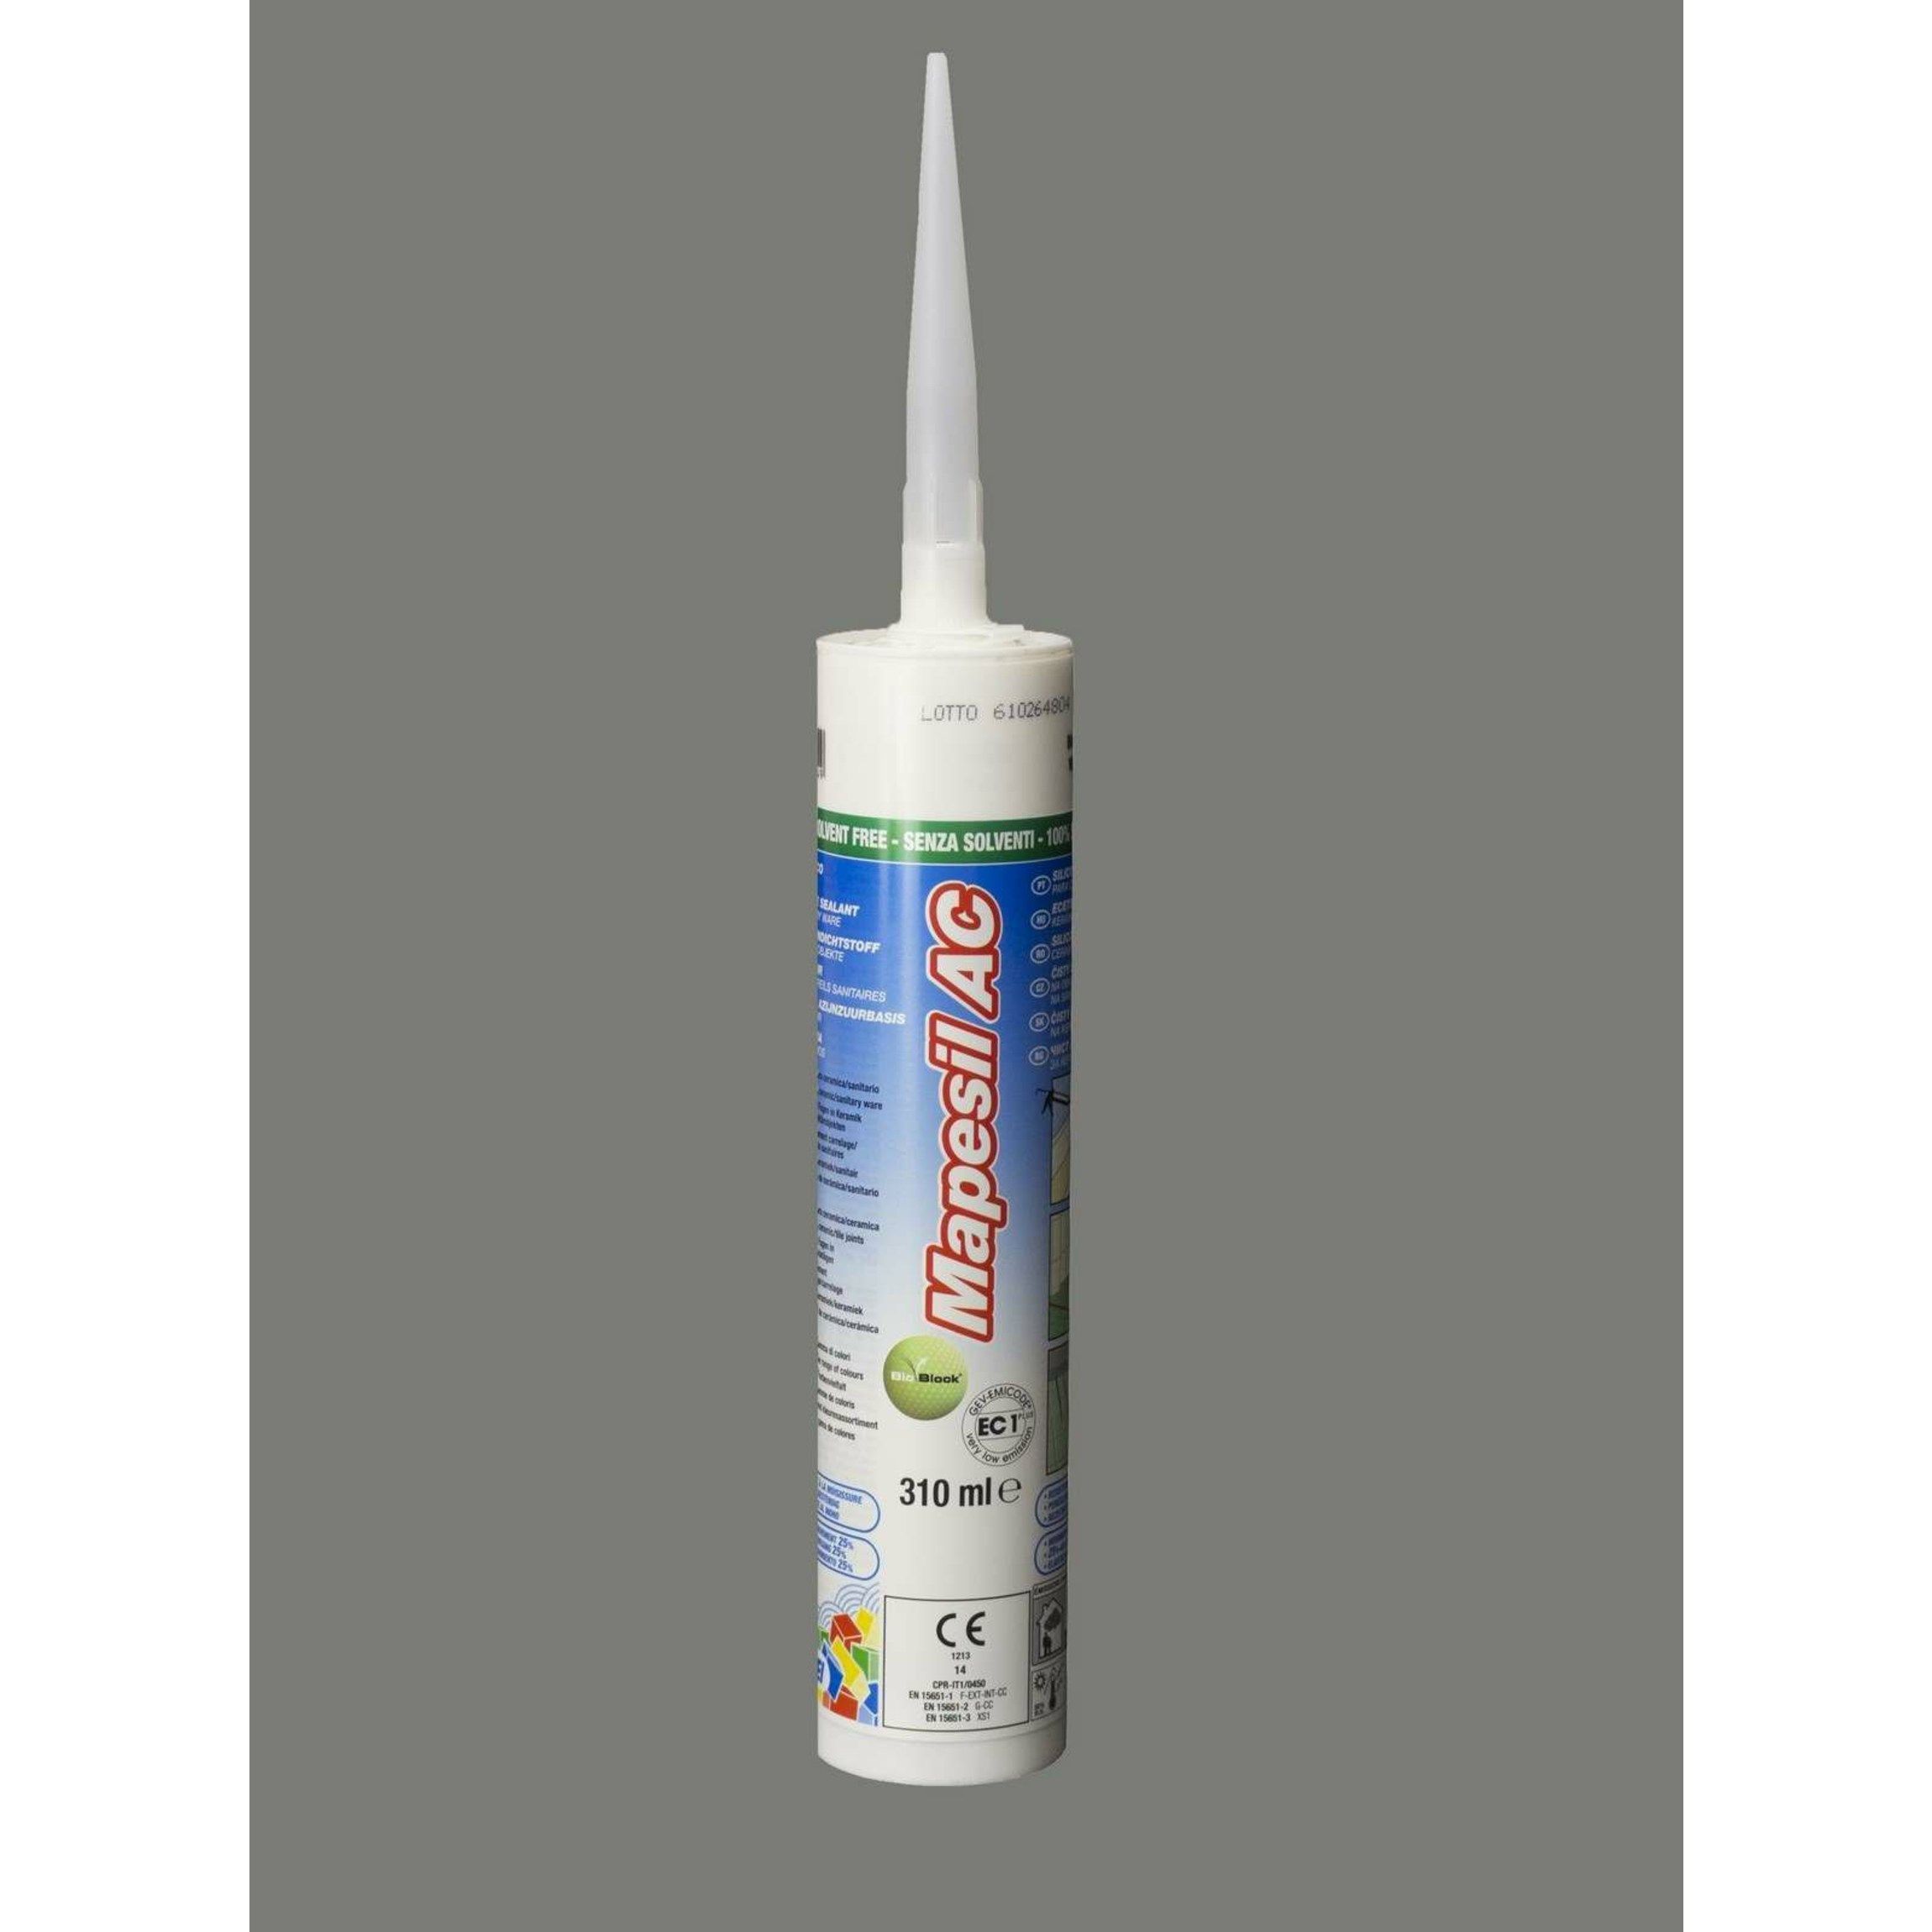 Juice Centimeter fedme Mapesil AC Cement Grey 113 Silicone Sealant 310ml